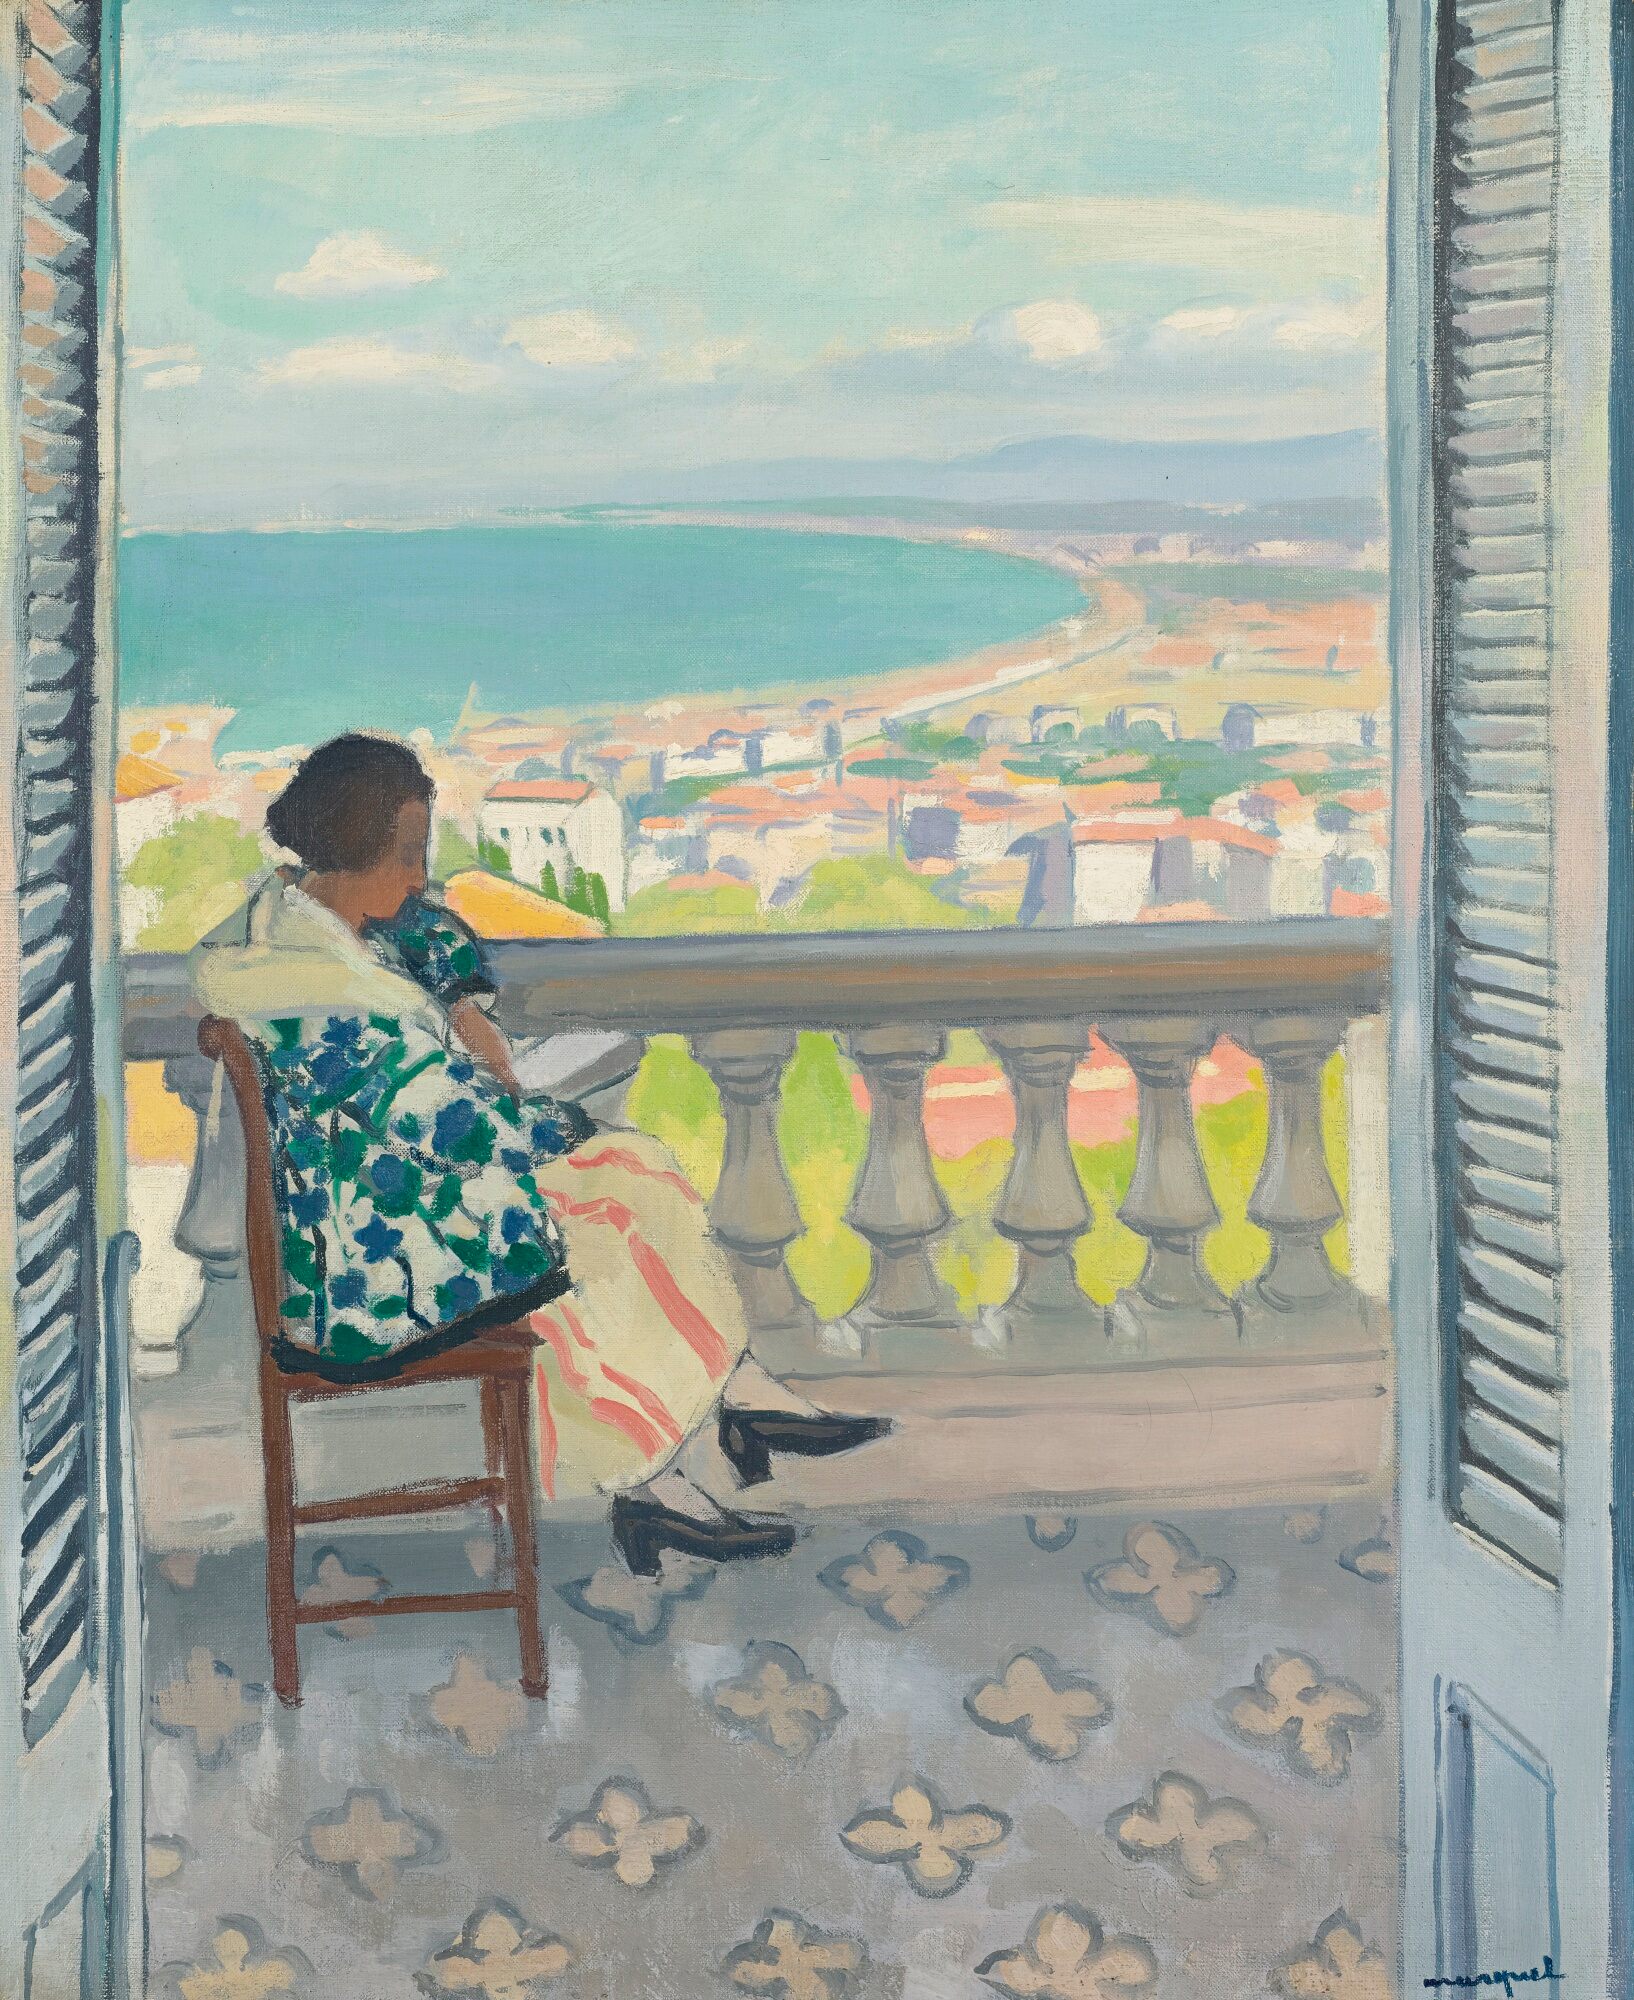 Madame Albert Marquet Reading by Albert Marquet - 1924 - 73 x 59.7 cm private collection